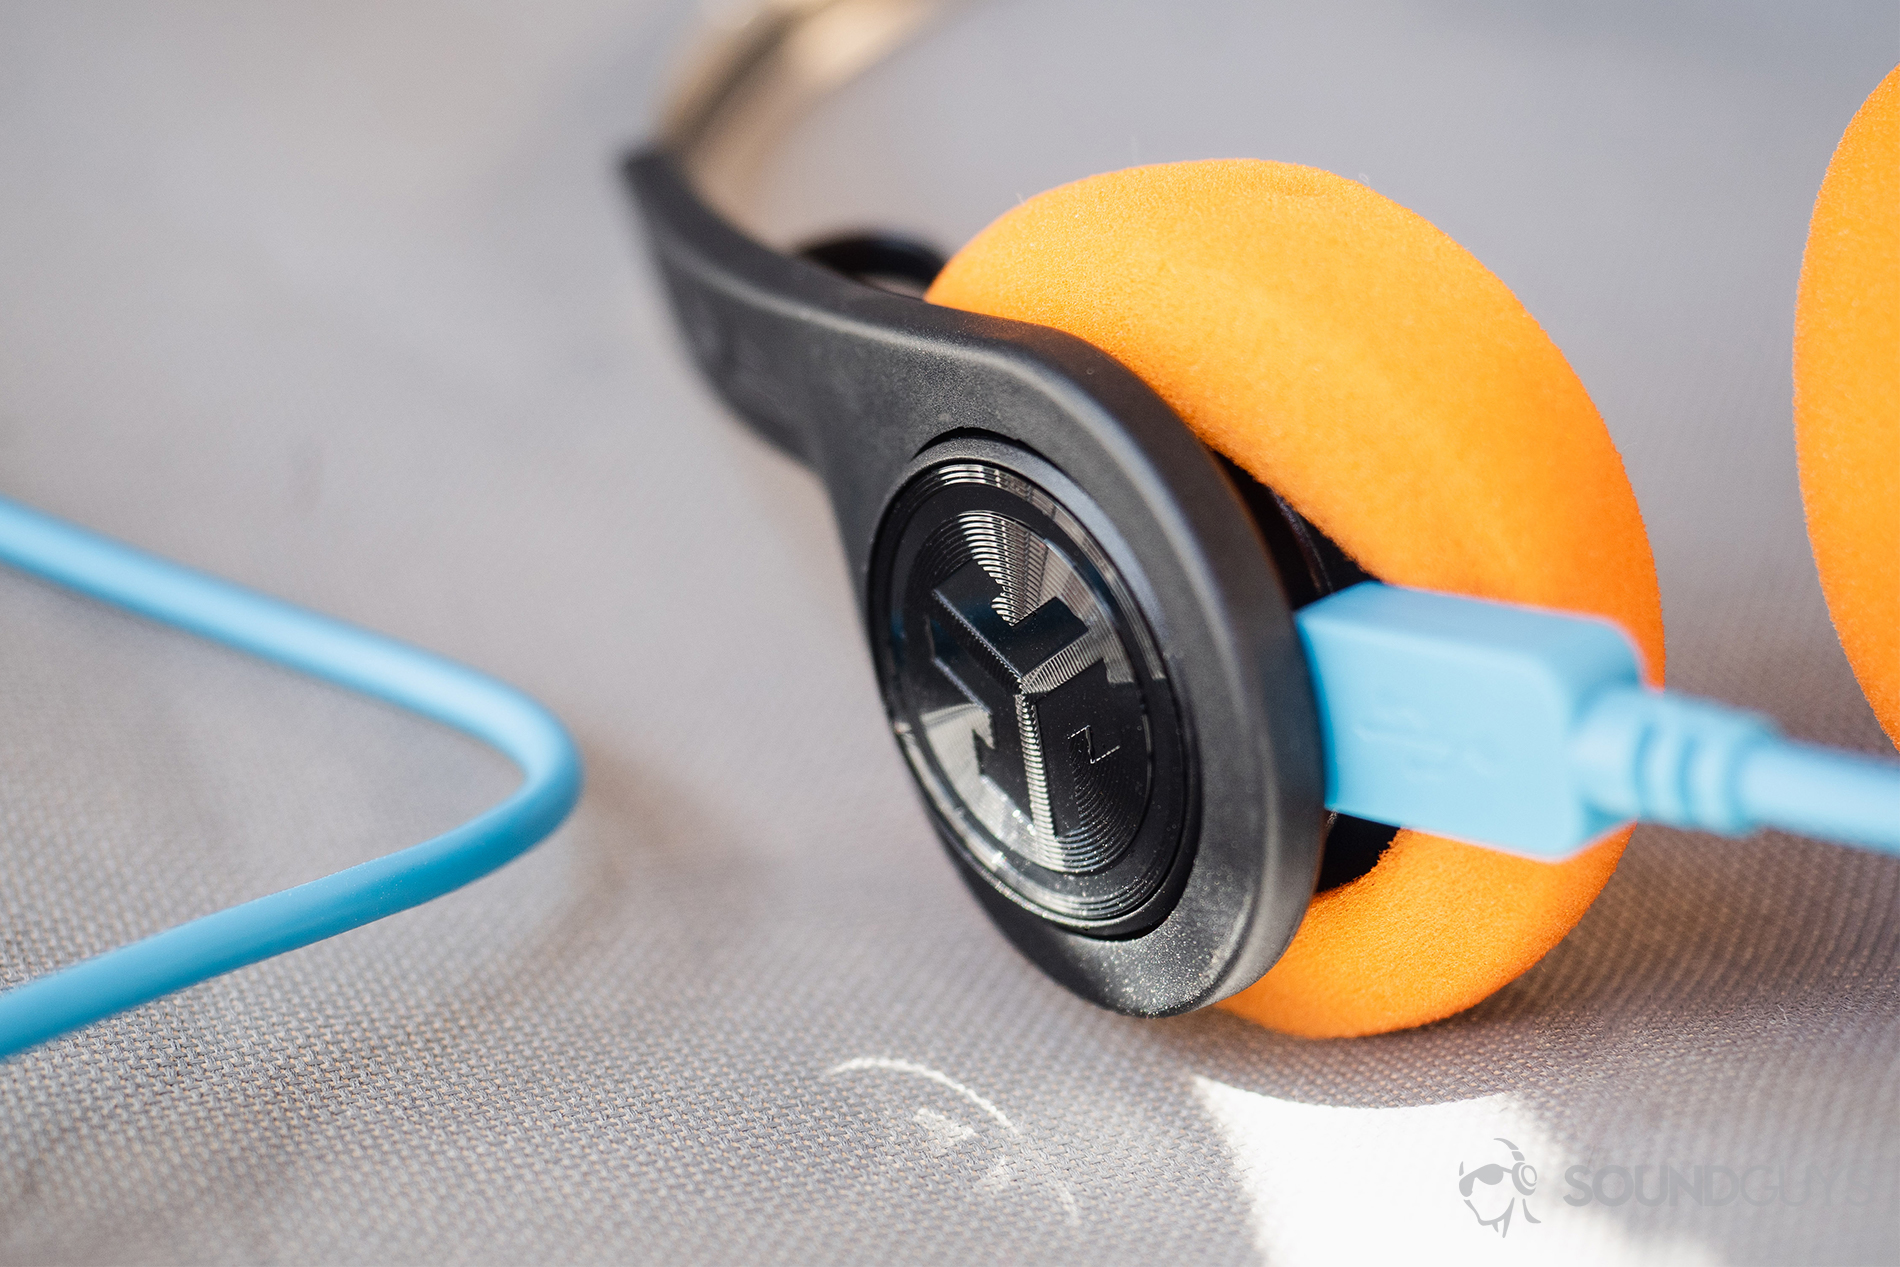 JLab Rewind Wireless Retro: The blue micro-USB is plugged into the headphones with oragne foam pads.